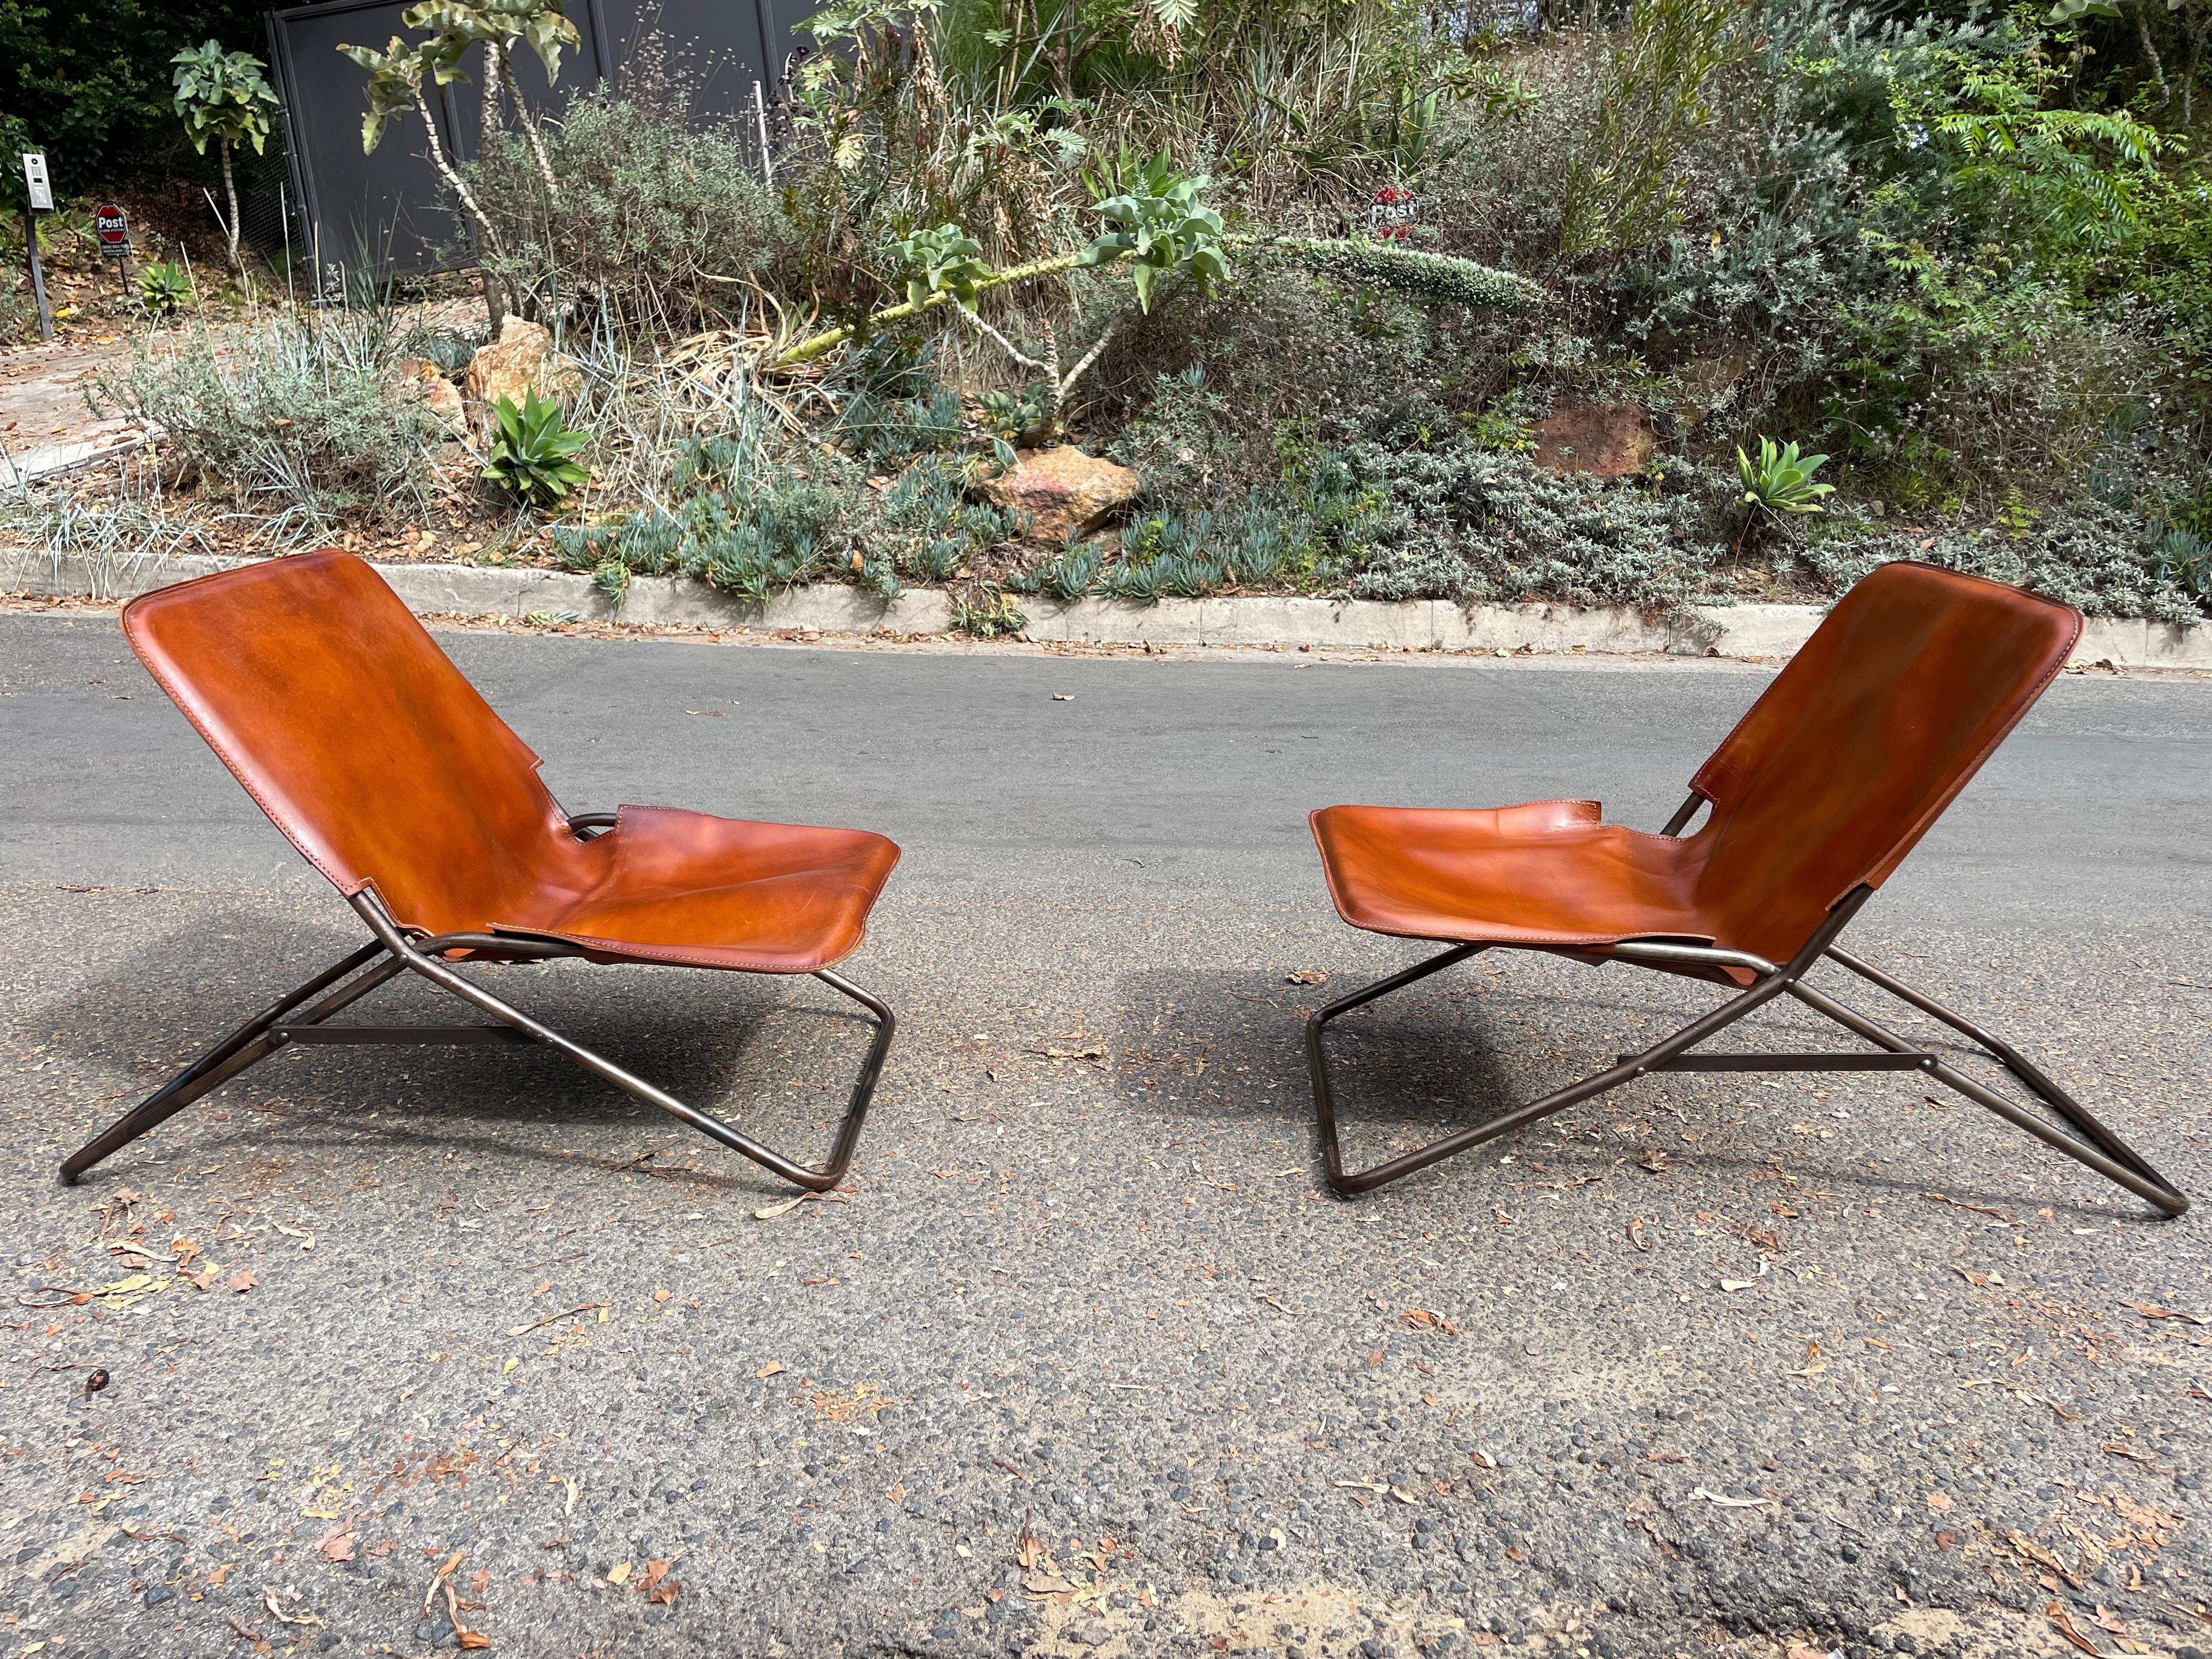 A stunning pair of vintage Lawson Fenning leather and metal lounge sling chairs. In original rich caramel leather. The chairs are foldable for storage.

Price is for the pair

We're currently pairing these cool leather chairs with a brass